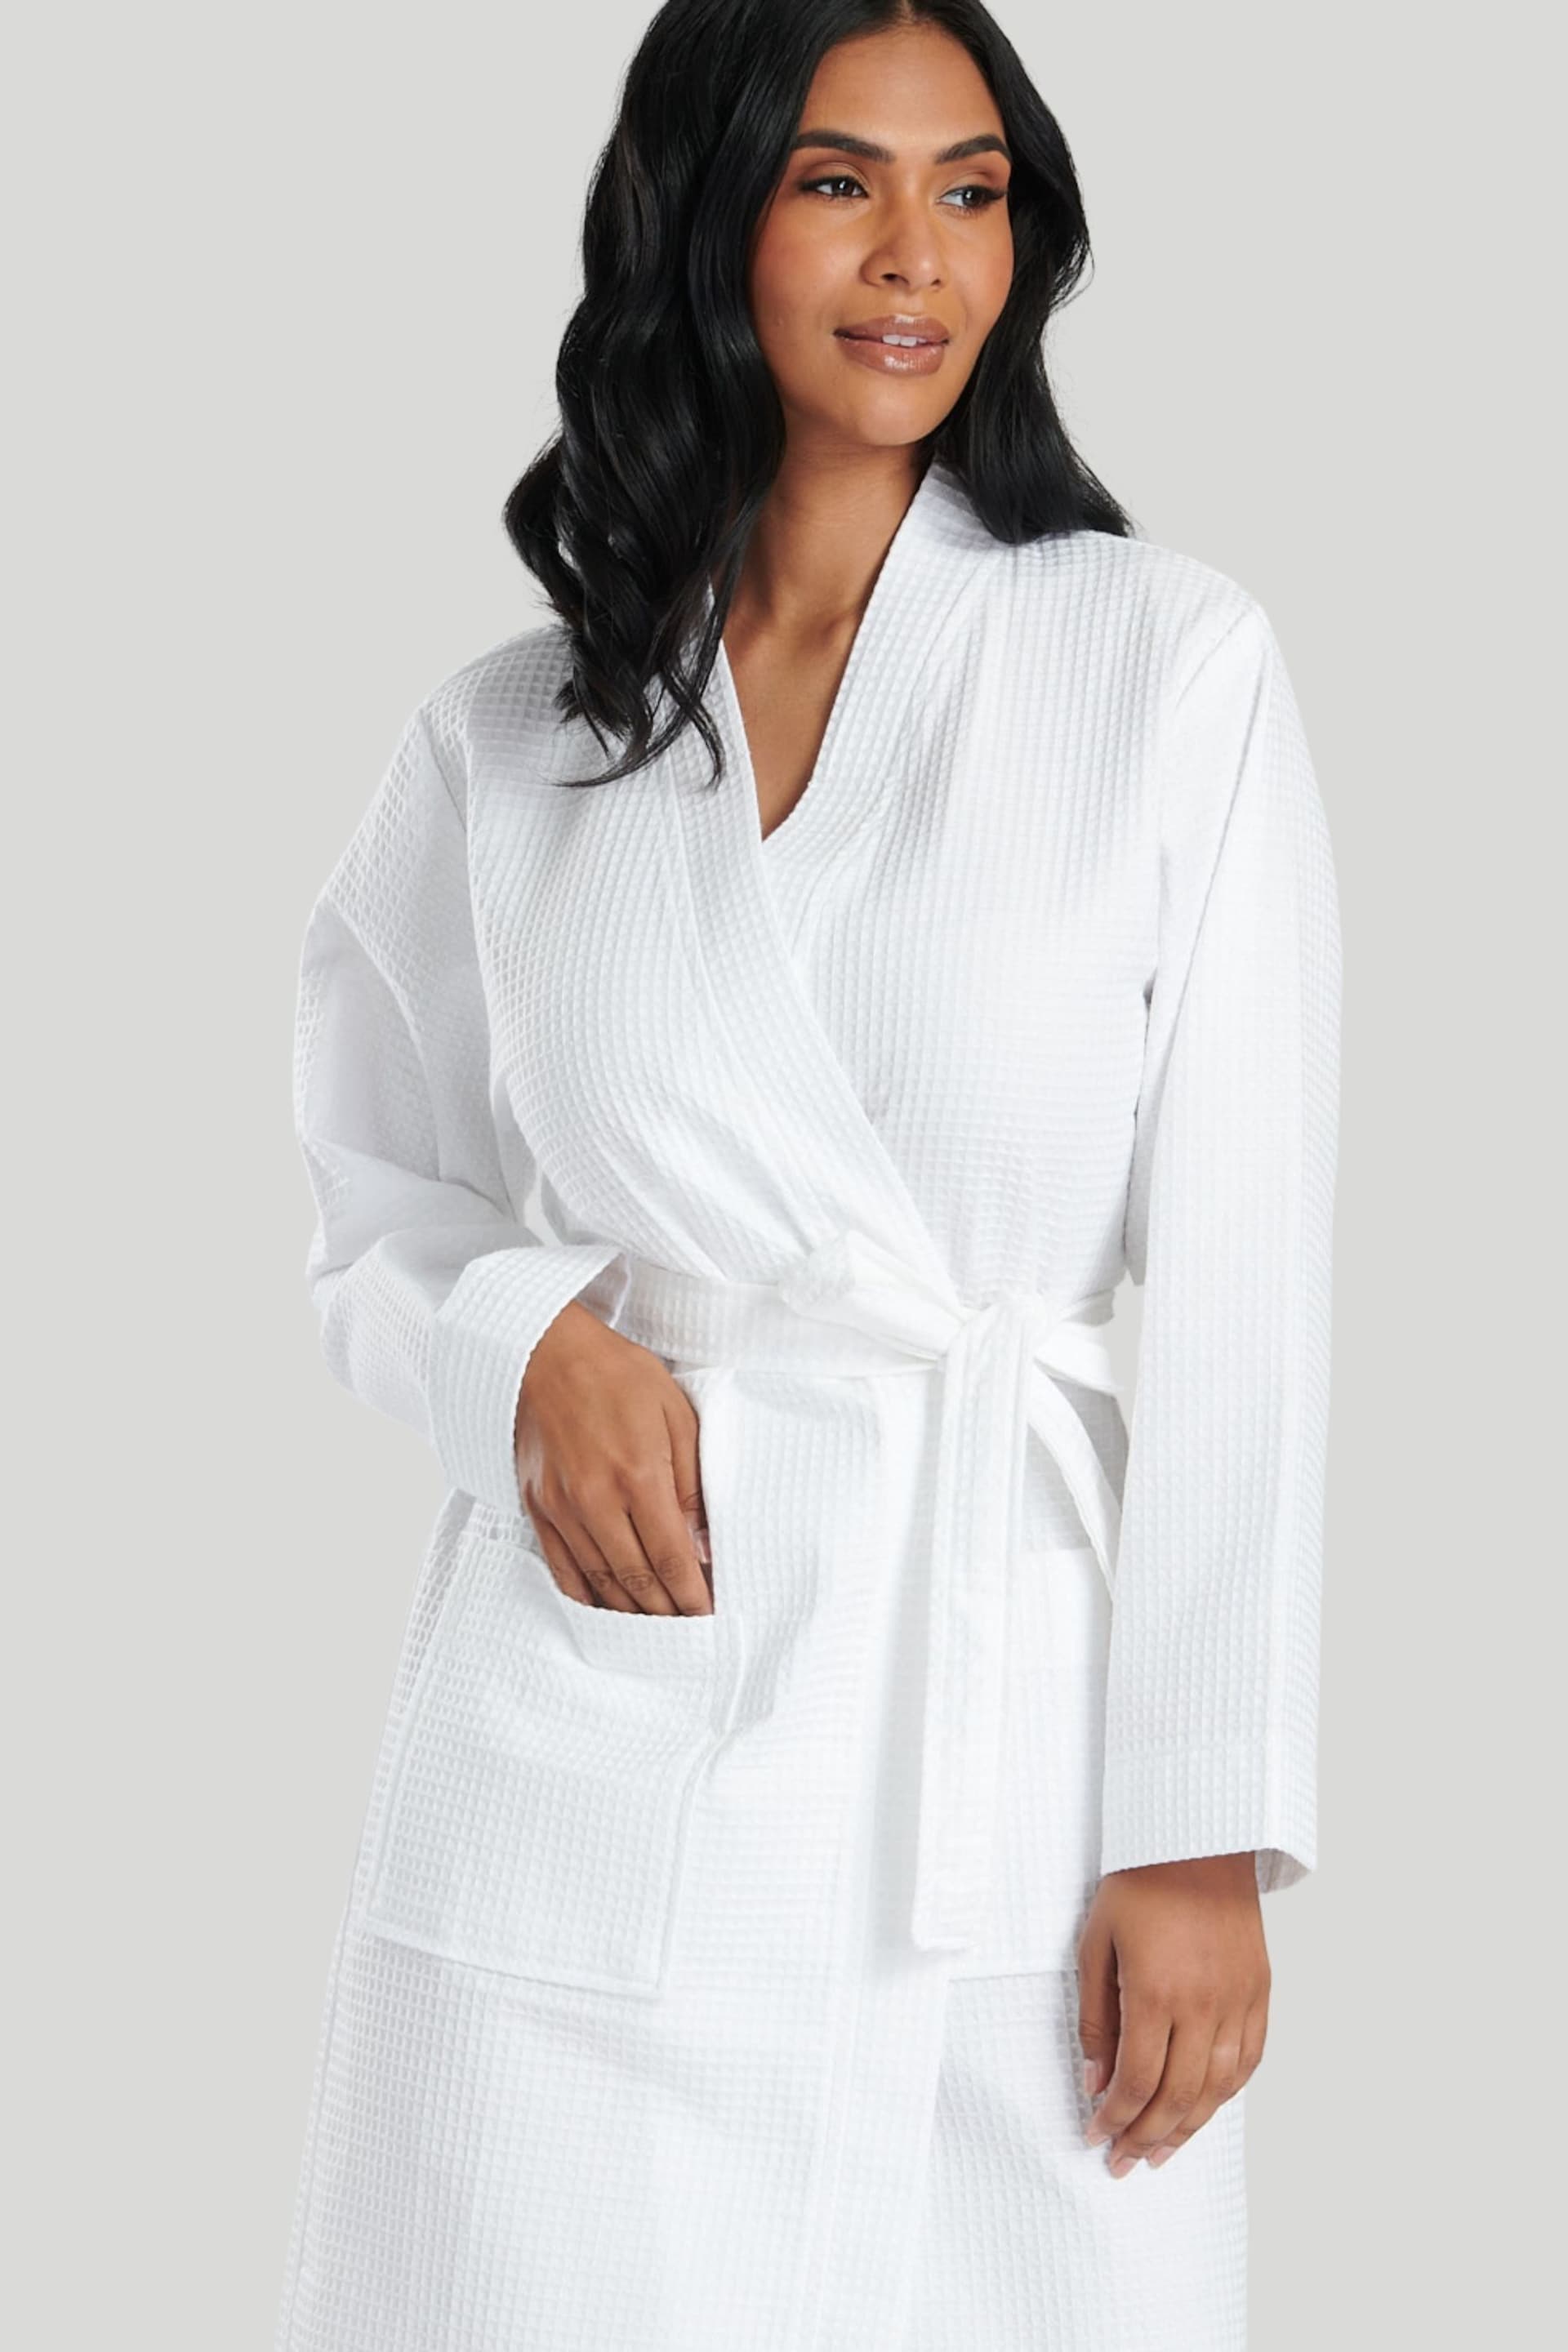 Loungeable White Cotton Waffle Robe - Image 4 of 7